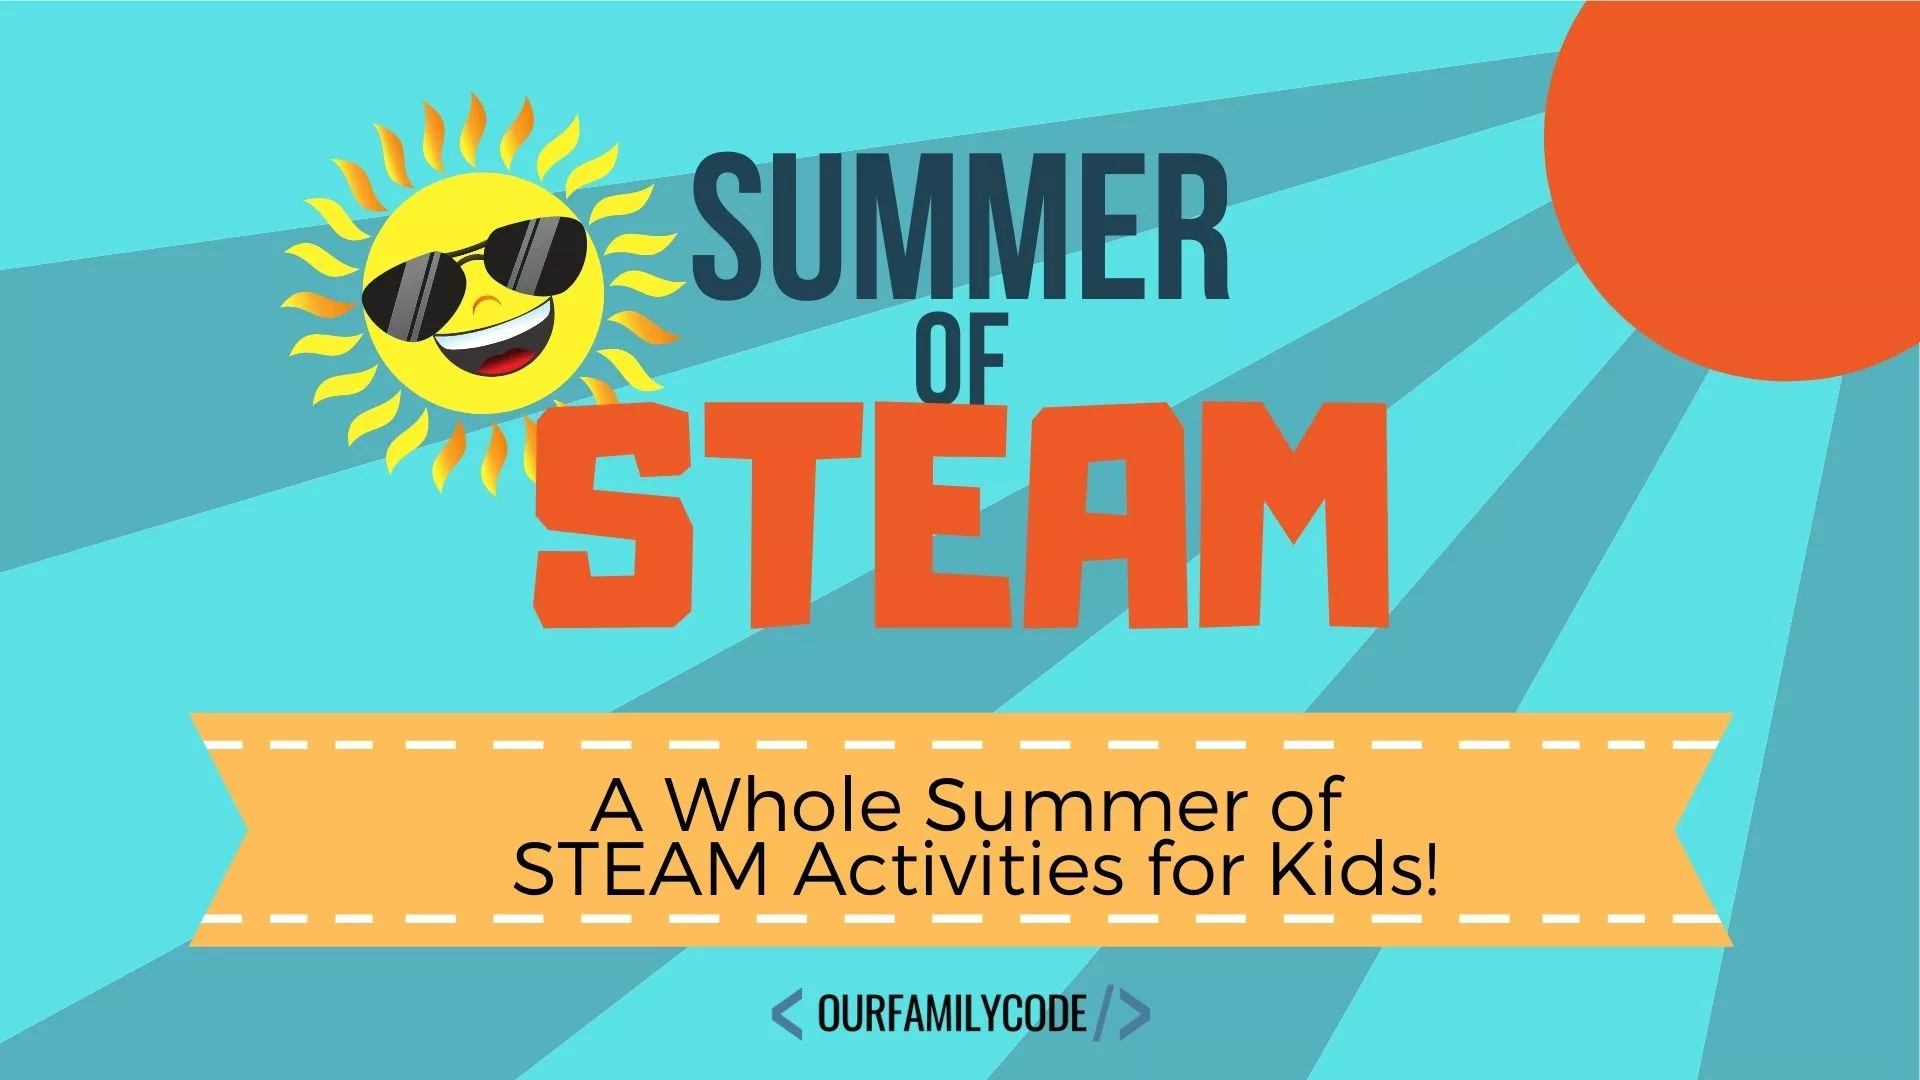 A photo of a sun wearing sunglasses with text that reads "Summer of STEAM a whole summer of STEAM activities for kids" with a blue background.